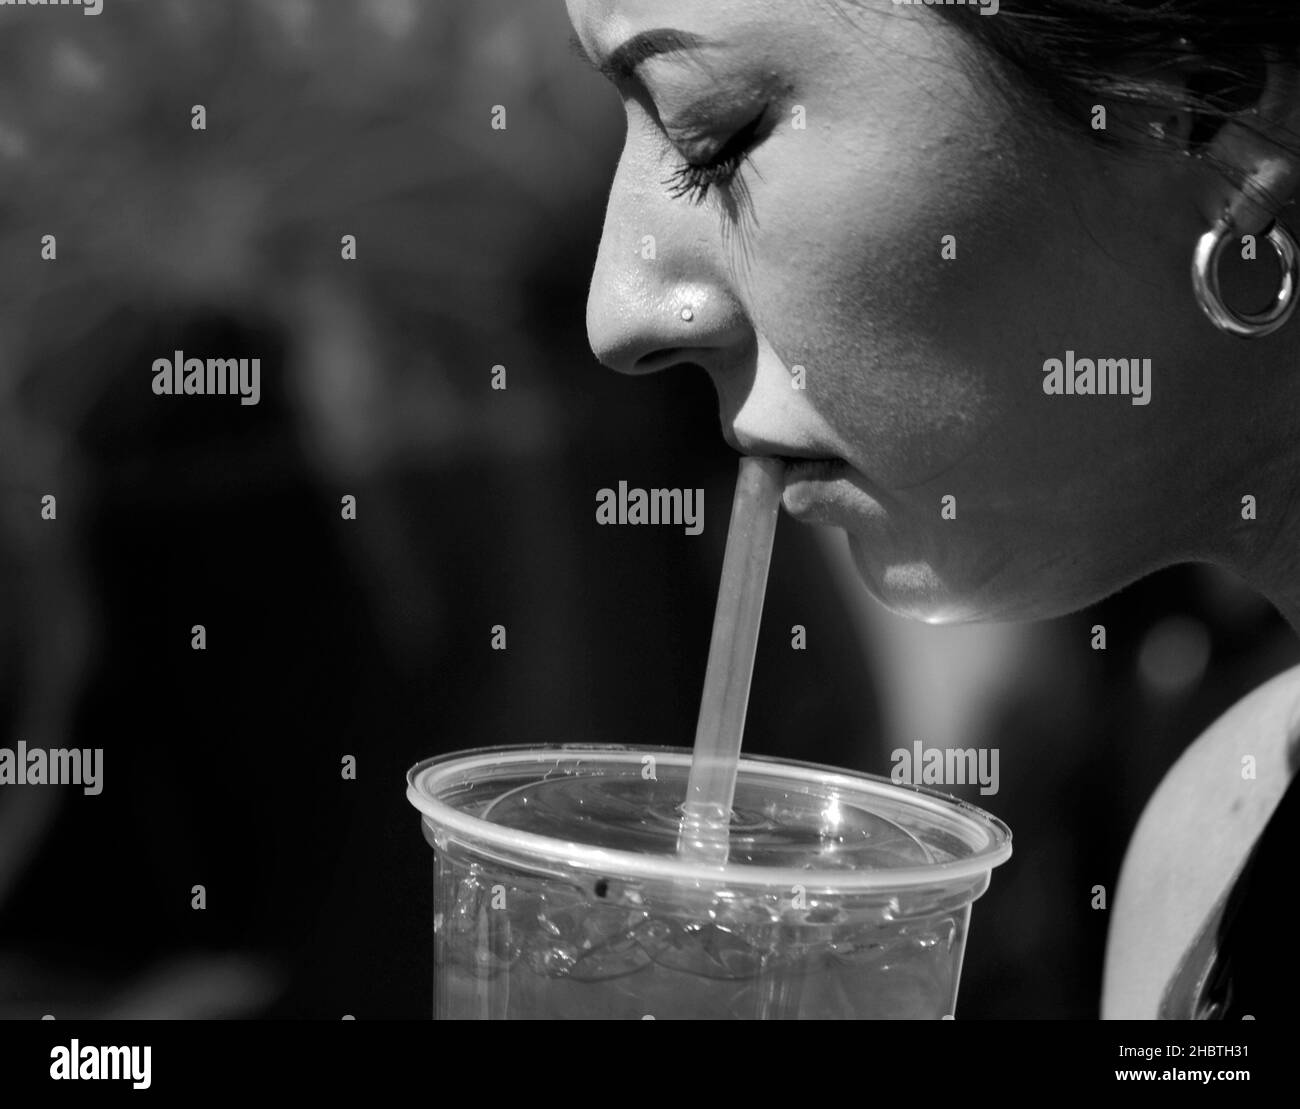 A young woman drinks juice from a plastic container using a plastic straw at a festival in Santa Fe, New Mexico. Stock Photo